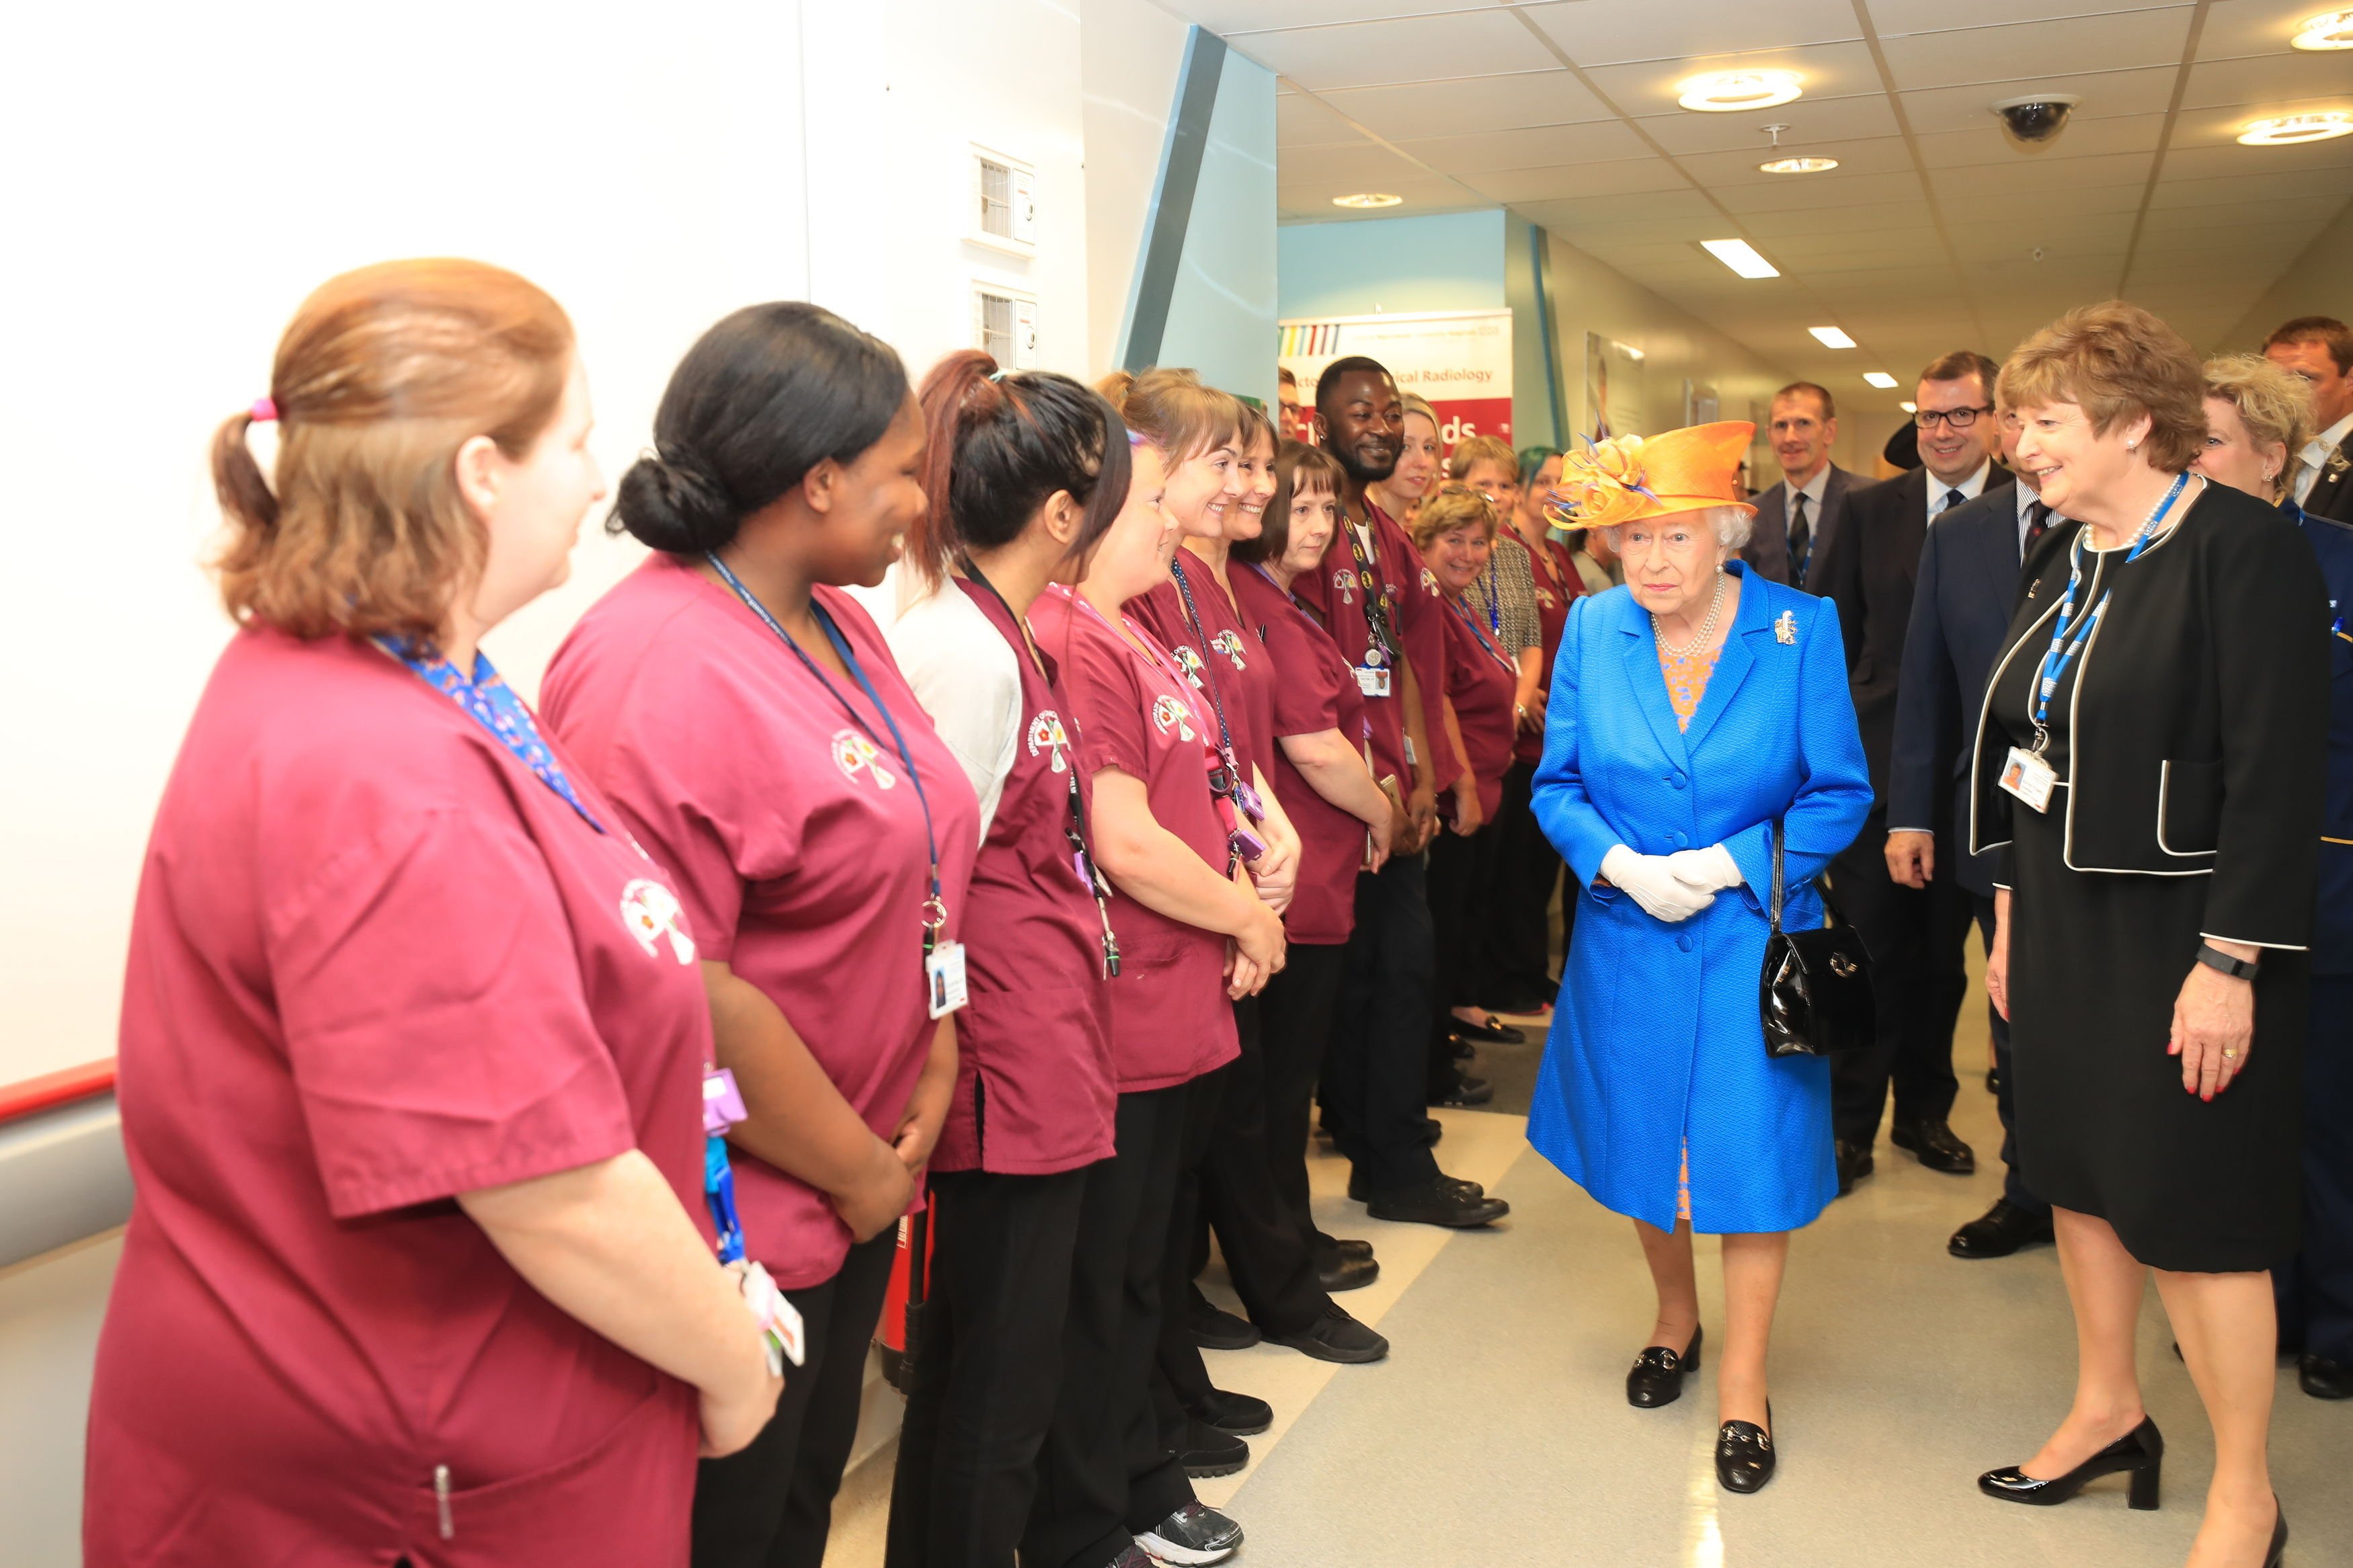 Queen Elizabeth II visits the Royal Manchester Children's Hospital on May 25, 2017 